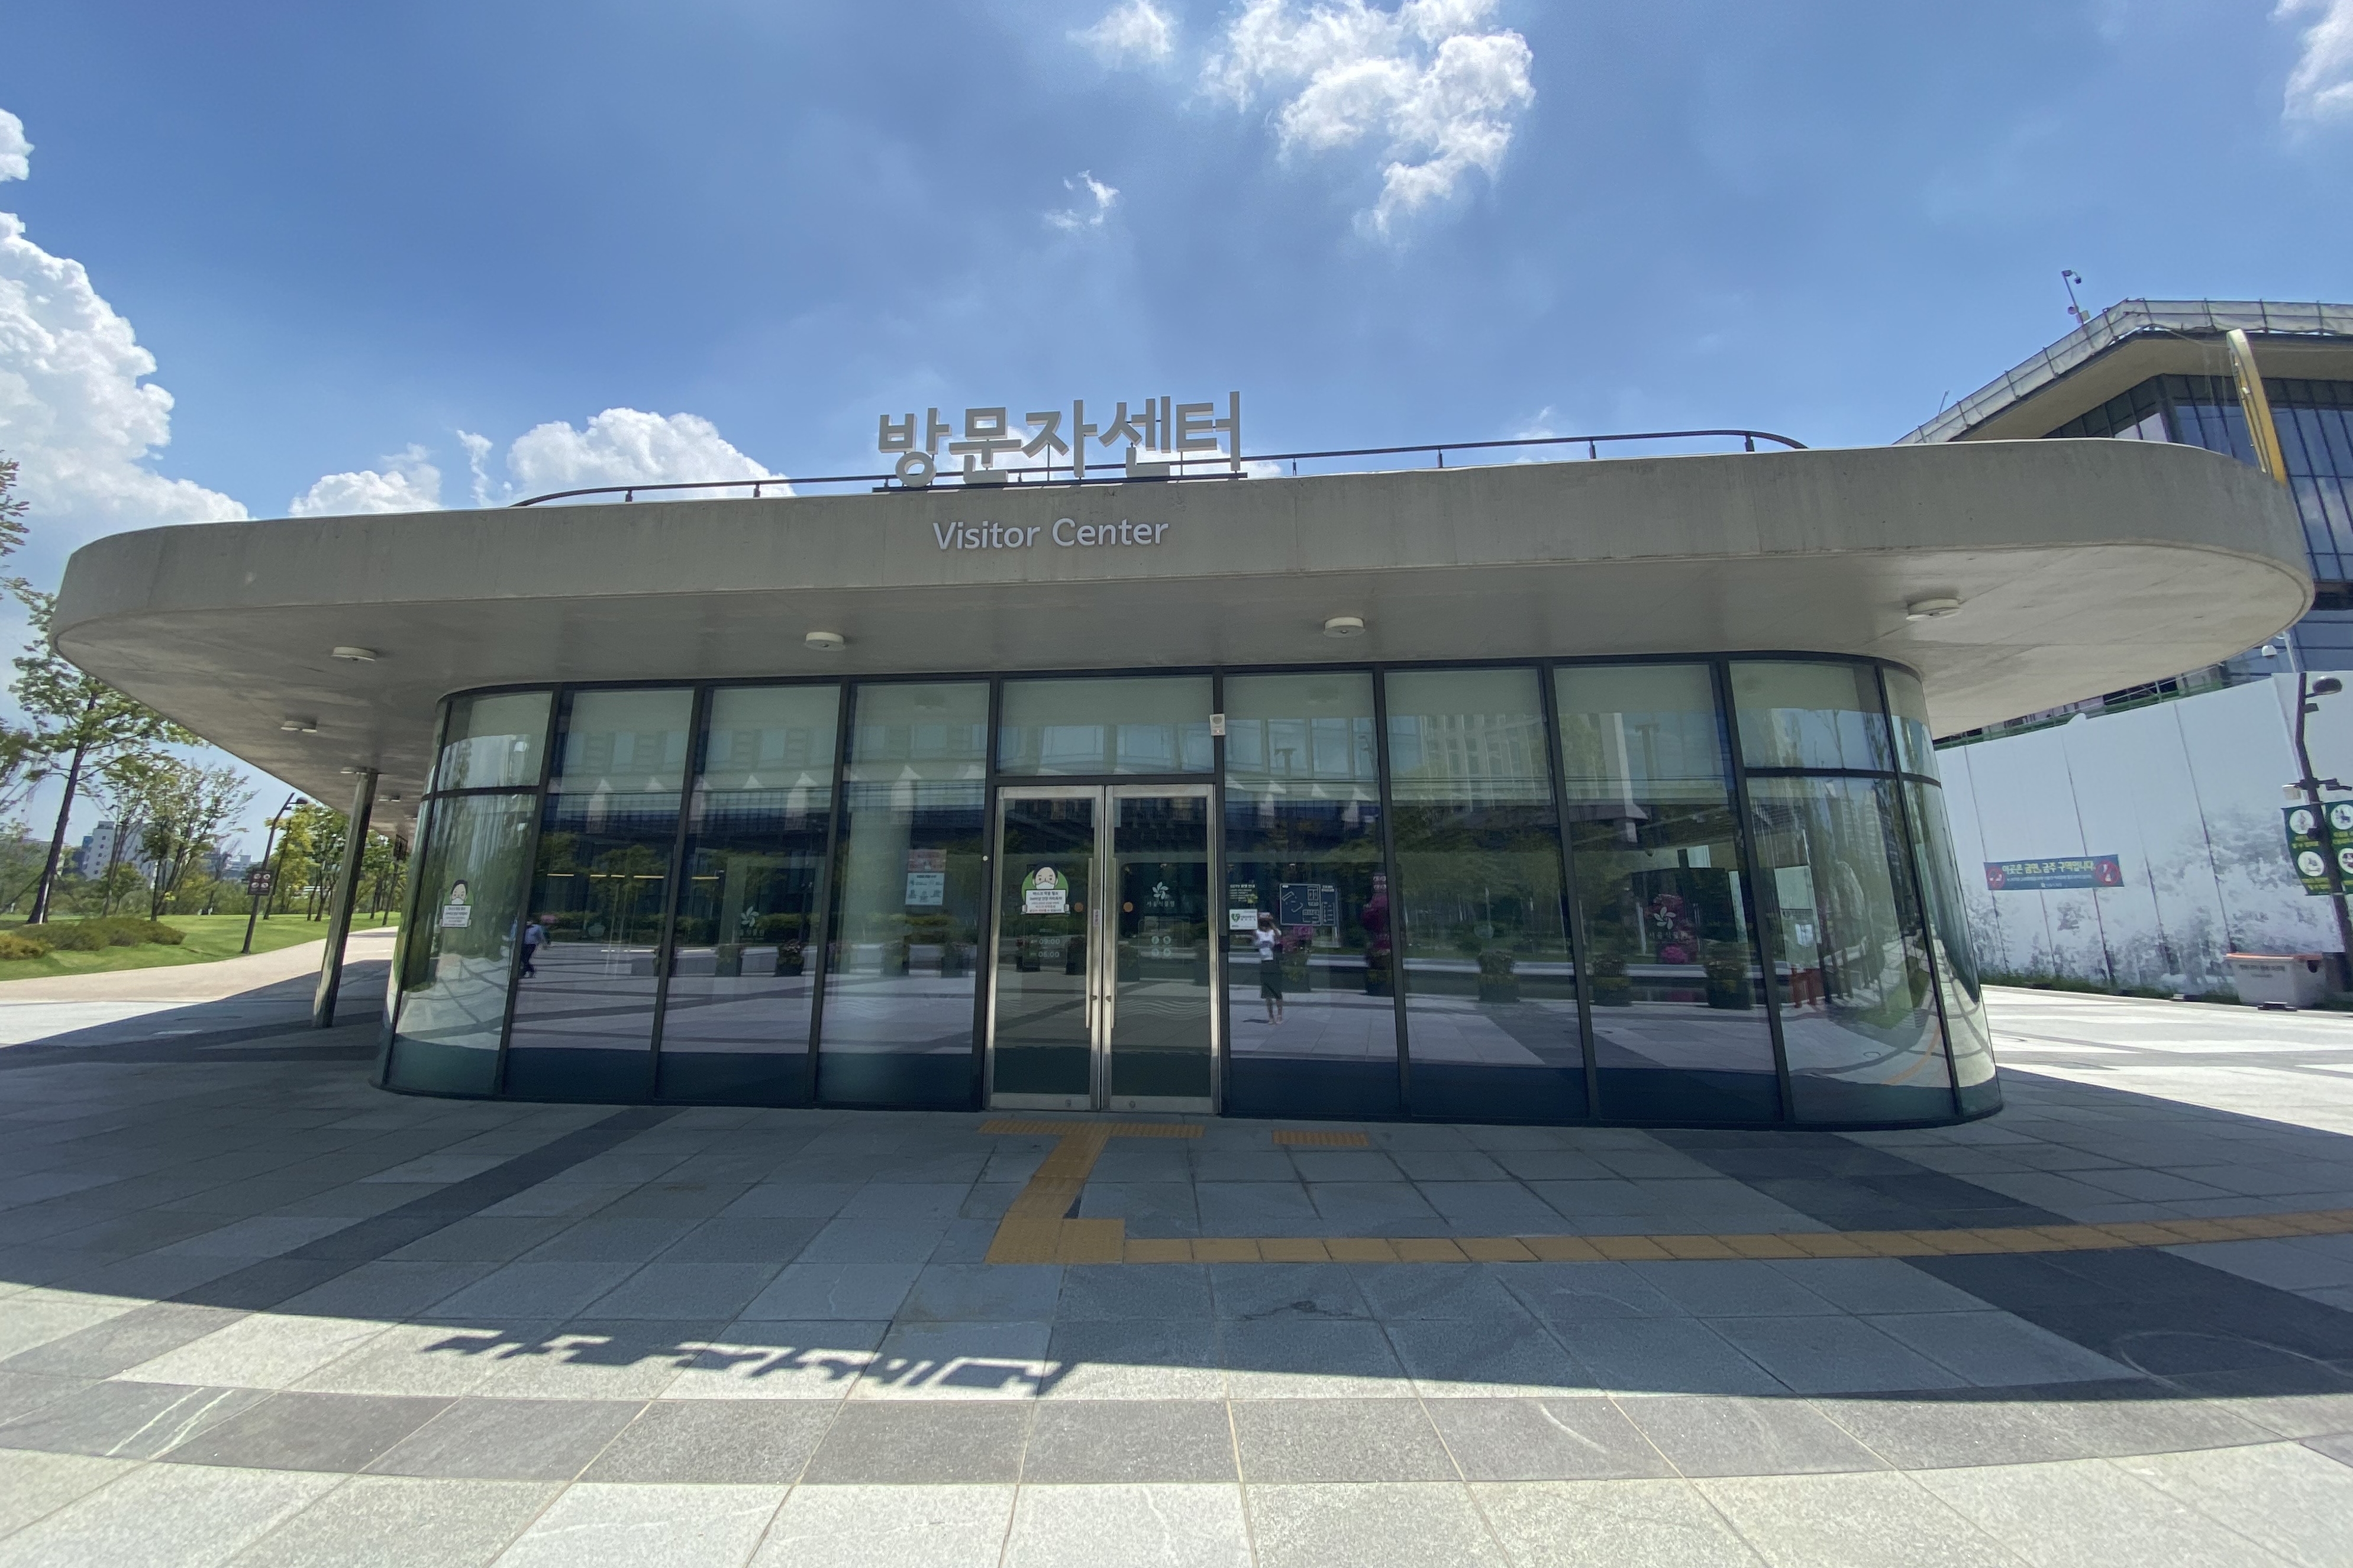 Guide map and information desk0 : Exterior view of the visitors center located outside Seoul Botanic Park
